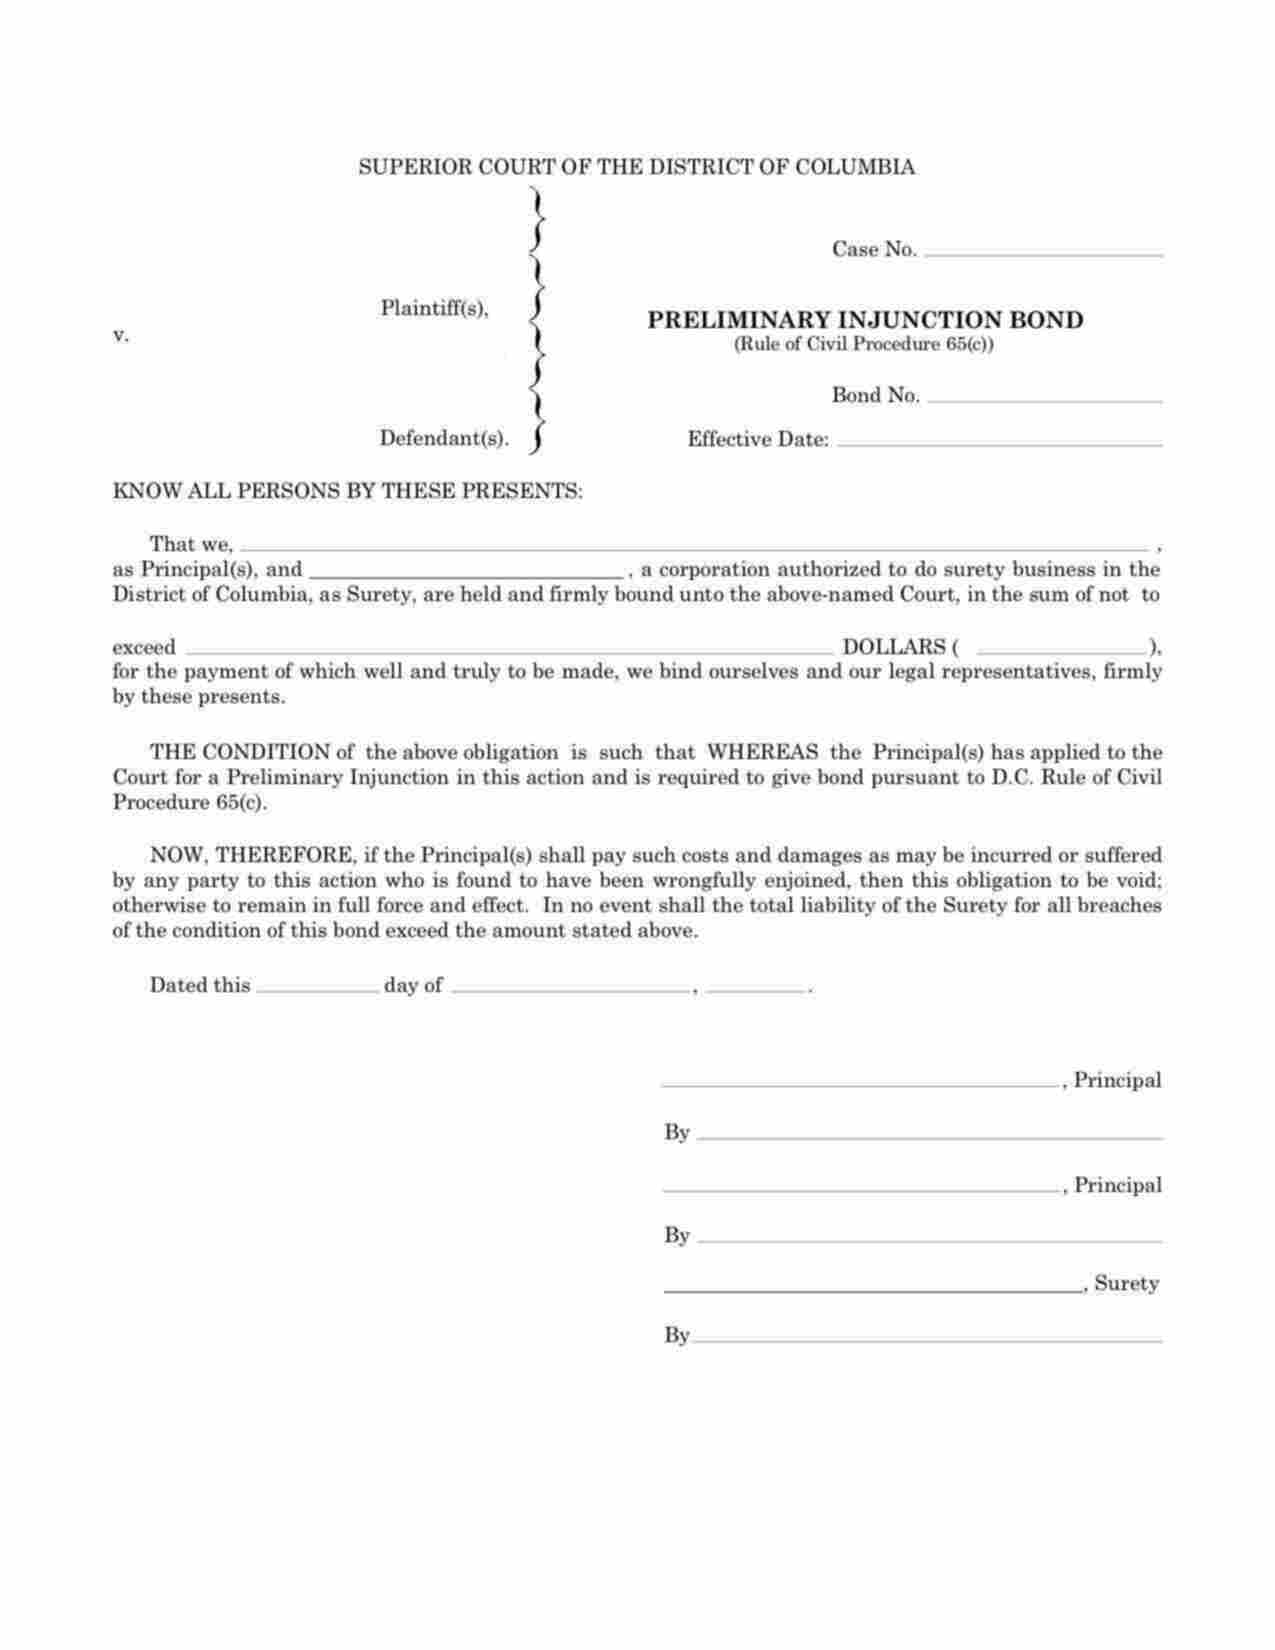 District of Columbia Preliminary Injunction Bond Form